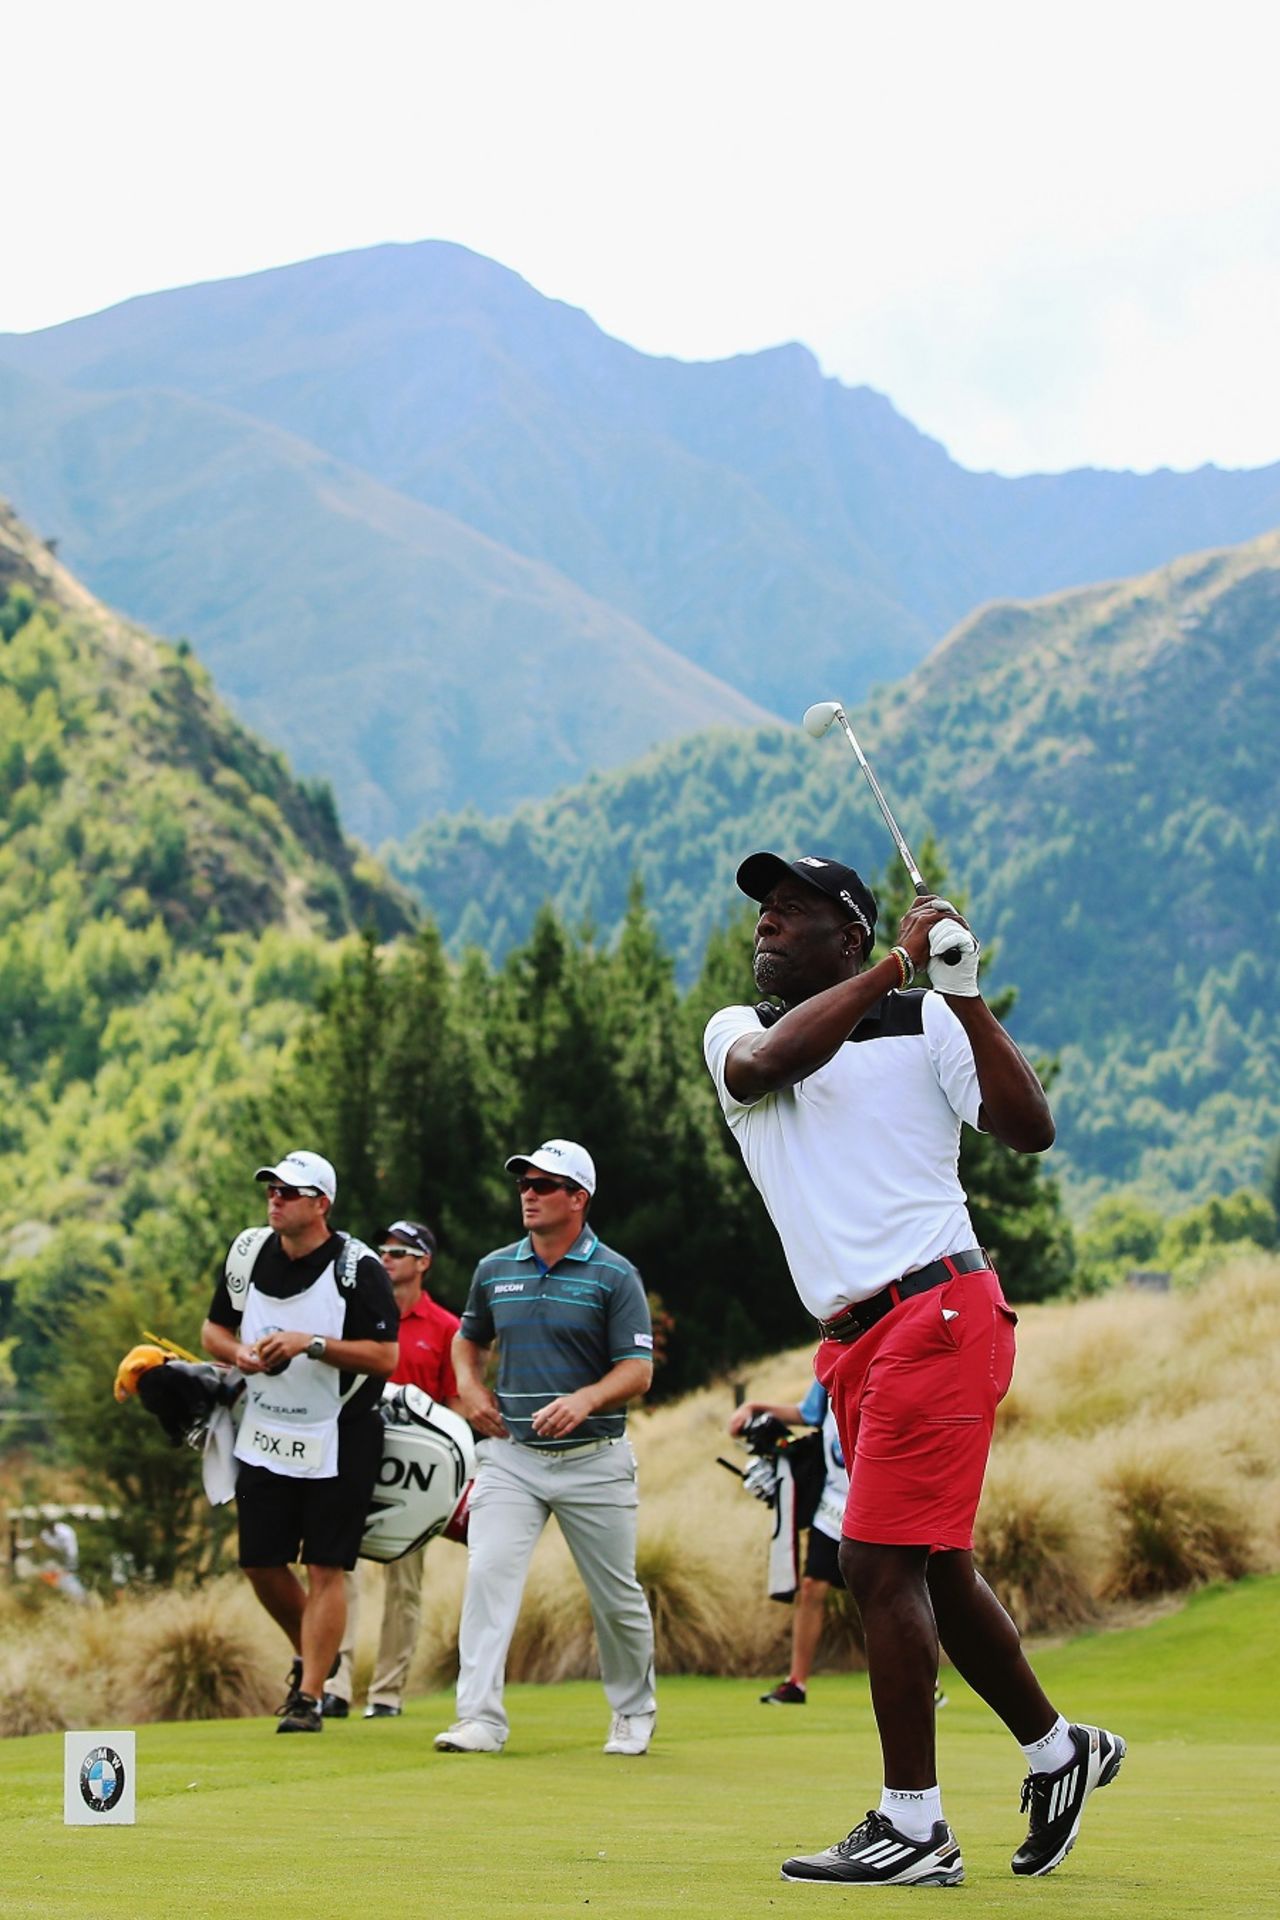 Viv Richards doesn't hold back in golf either, Queenstown, March 13, 2015